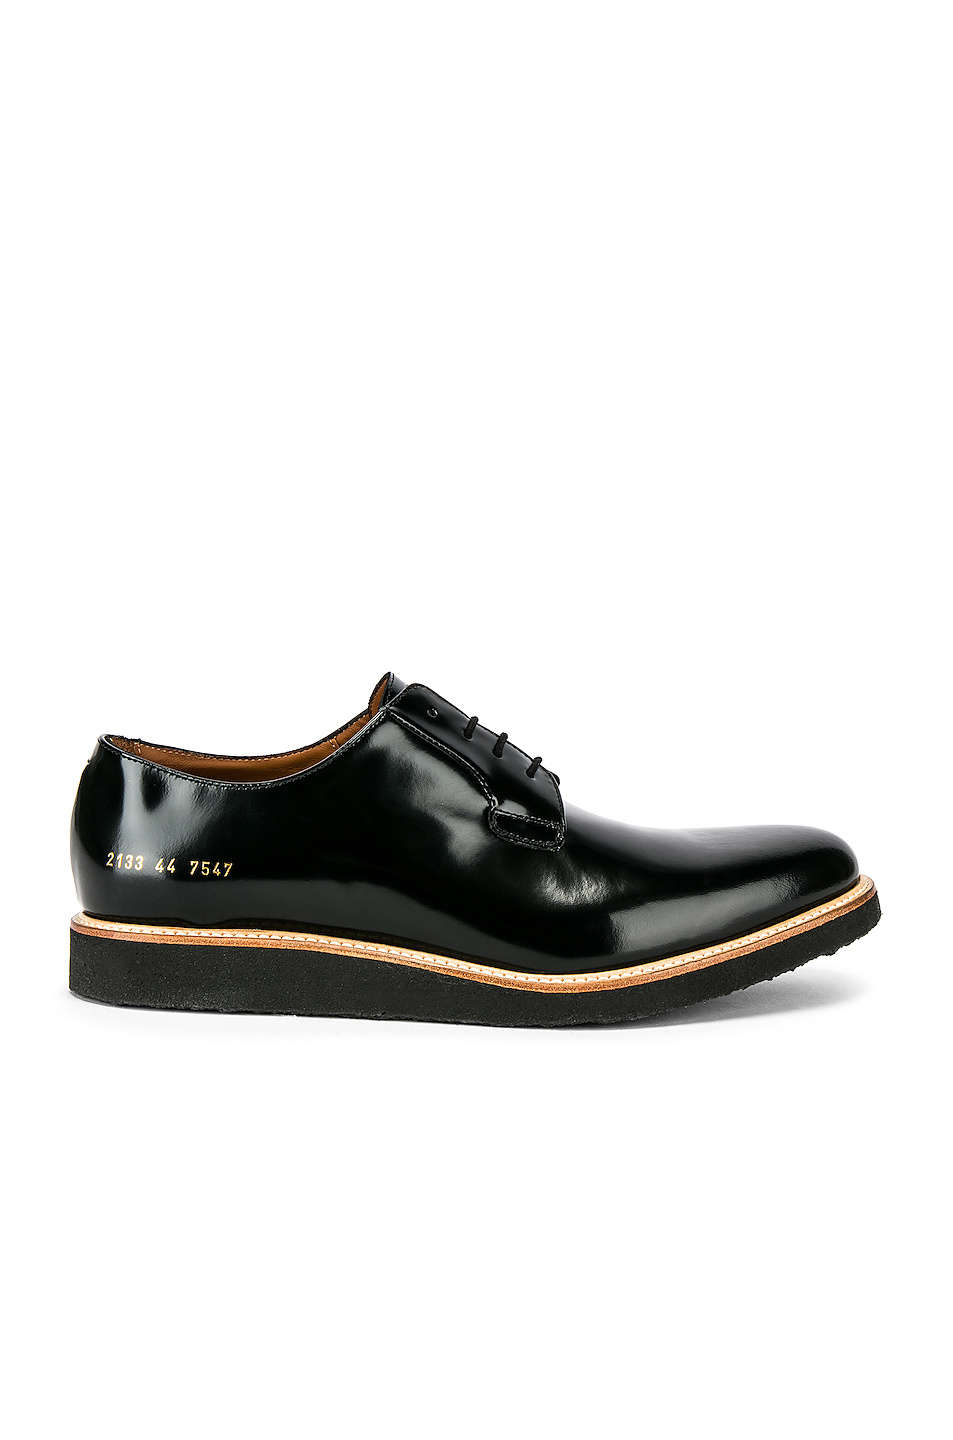   Common Projects Derby Shine 2133 Black 2133-7547